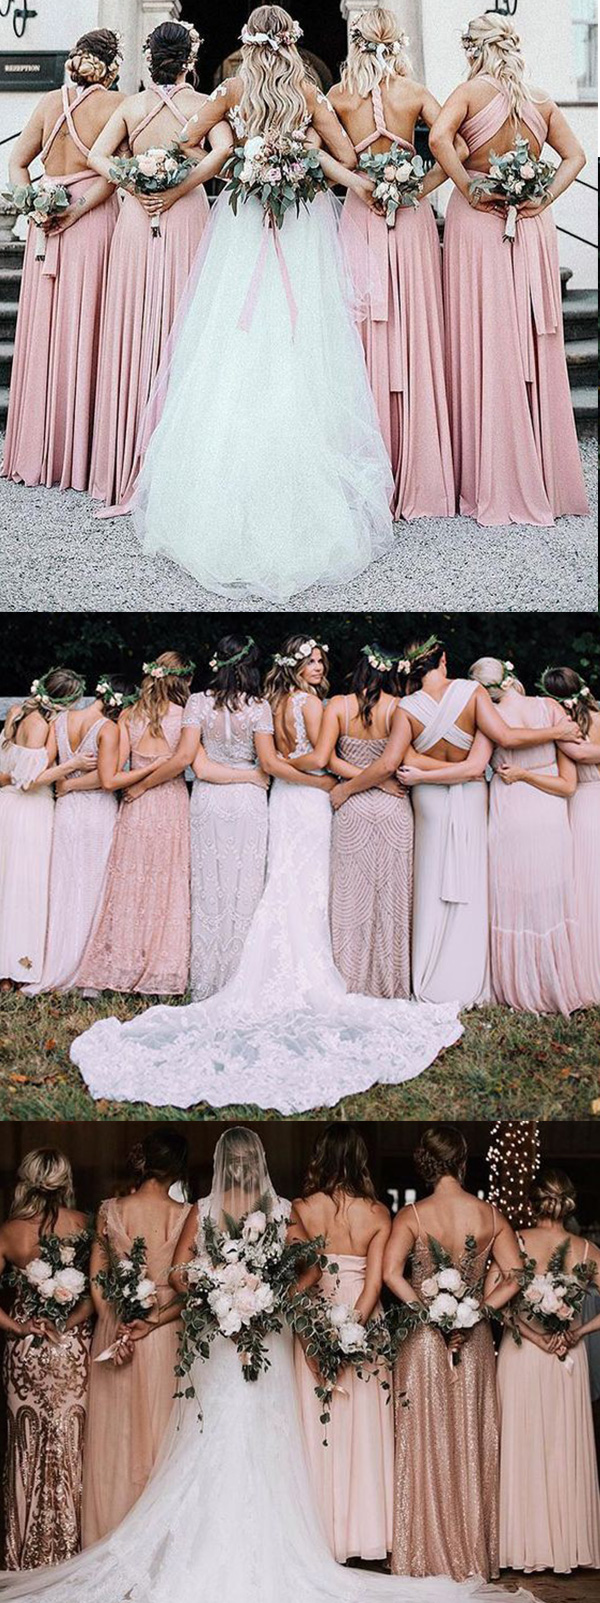 15 Bridesmaids down the aisle shots they scatter flowers the happy timeeative photo shot withness the happy time